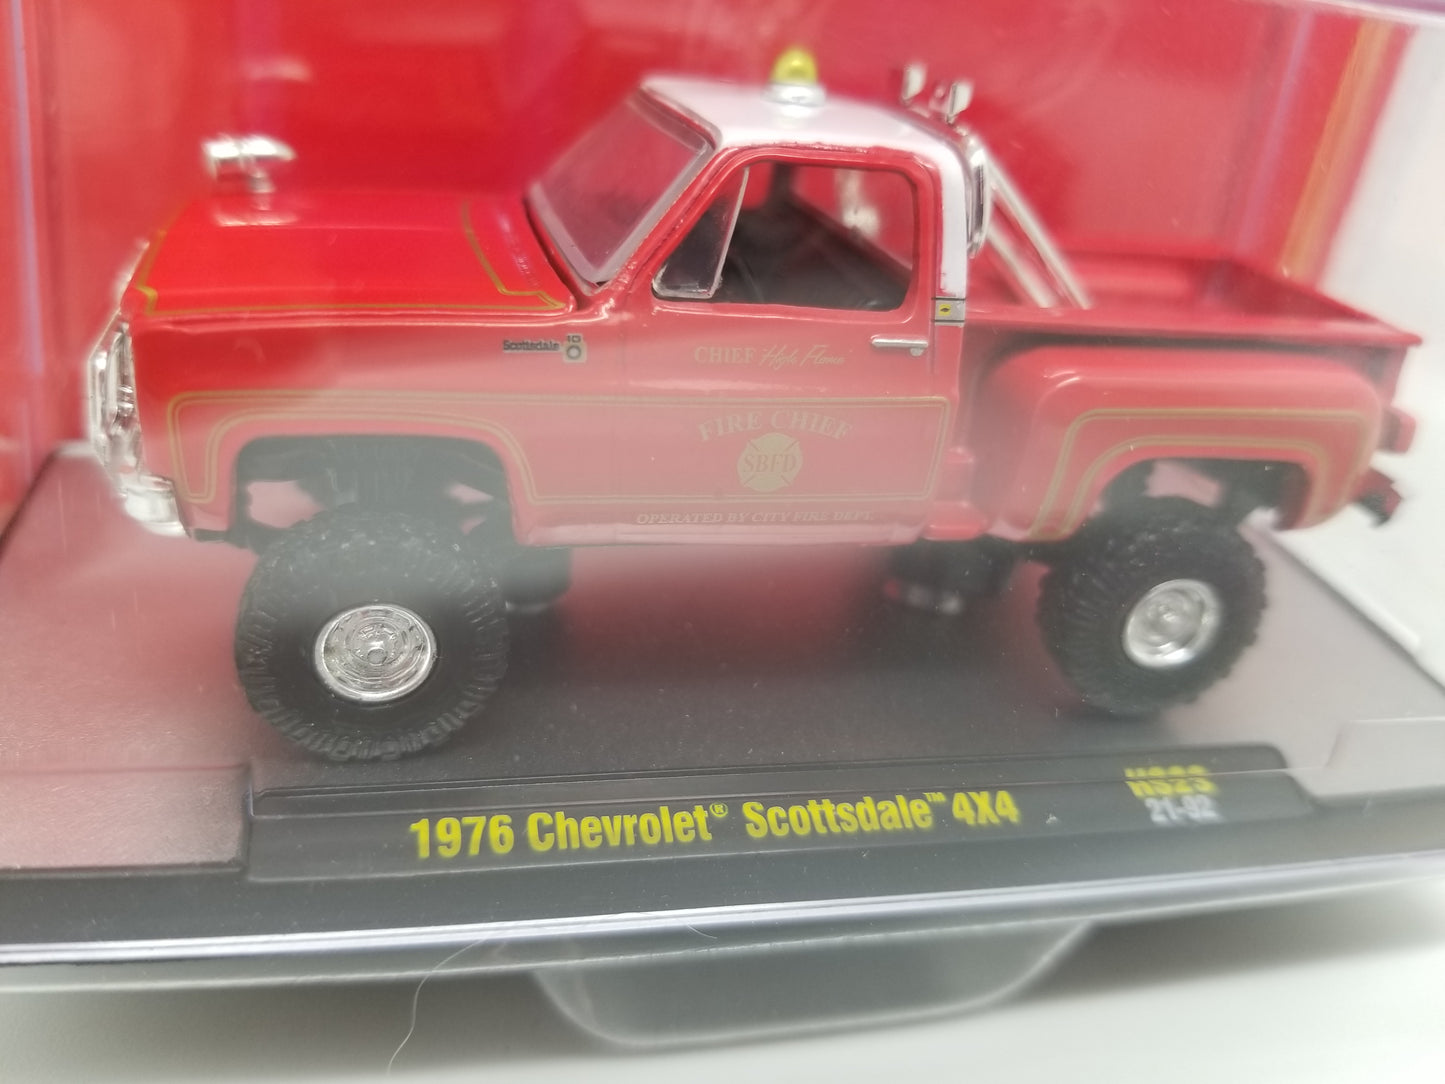 M2 1976 Chevrolet Scottsdale 4x4 - Chief "High Flame" SBFD